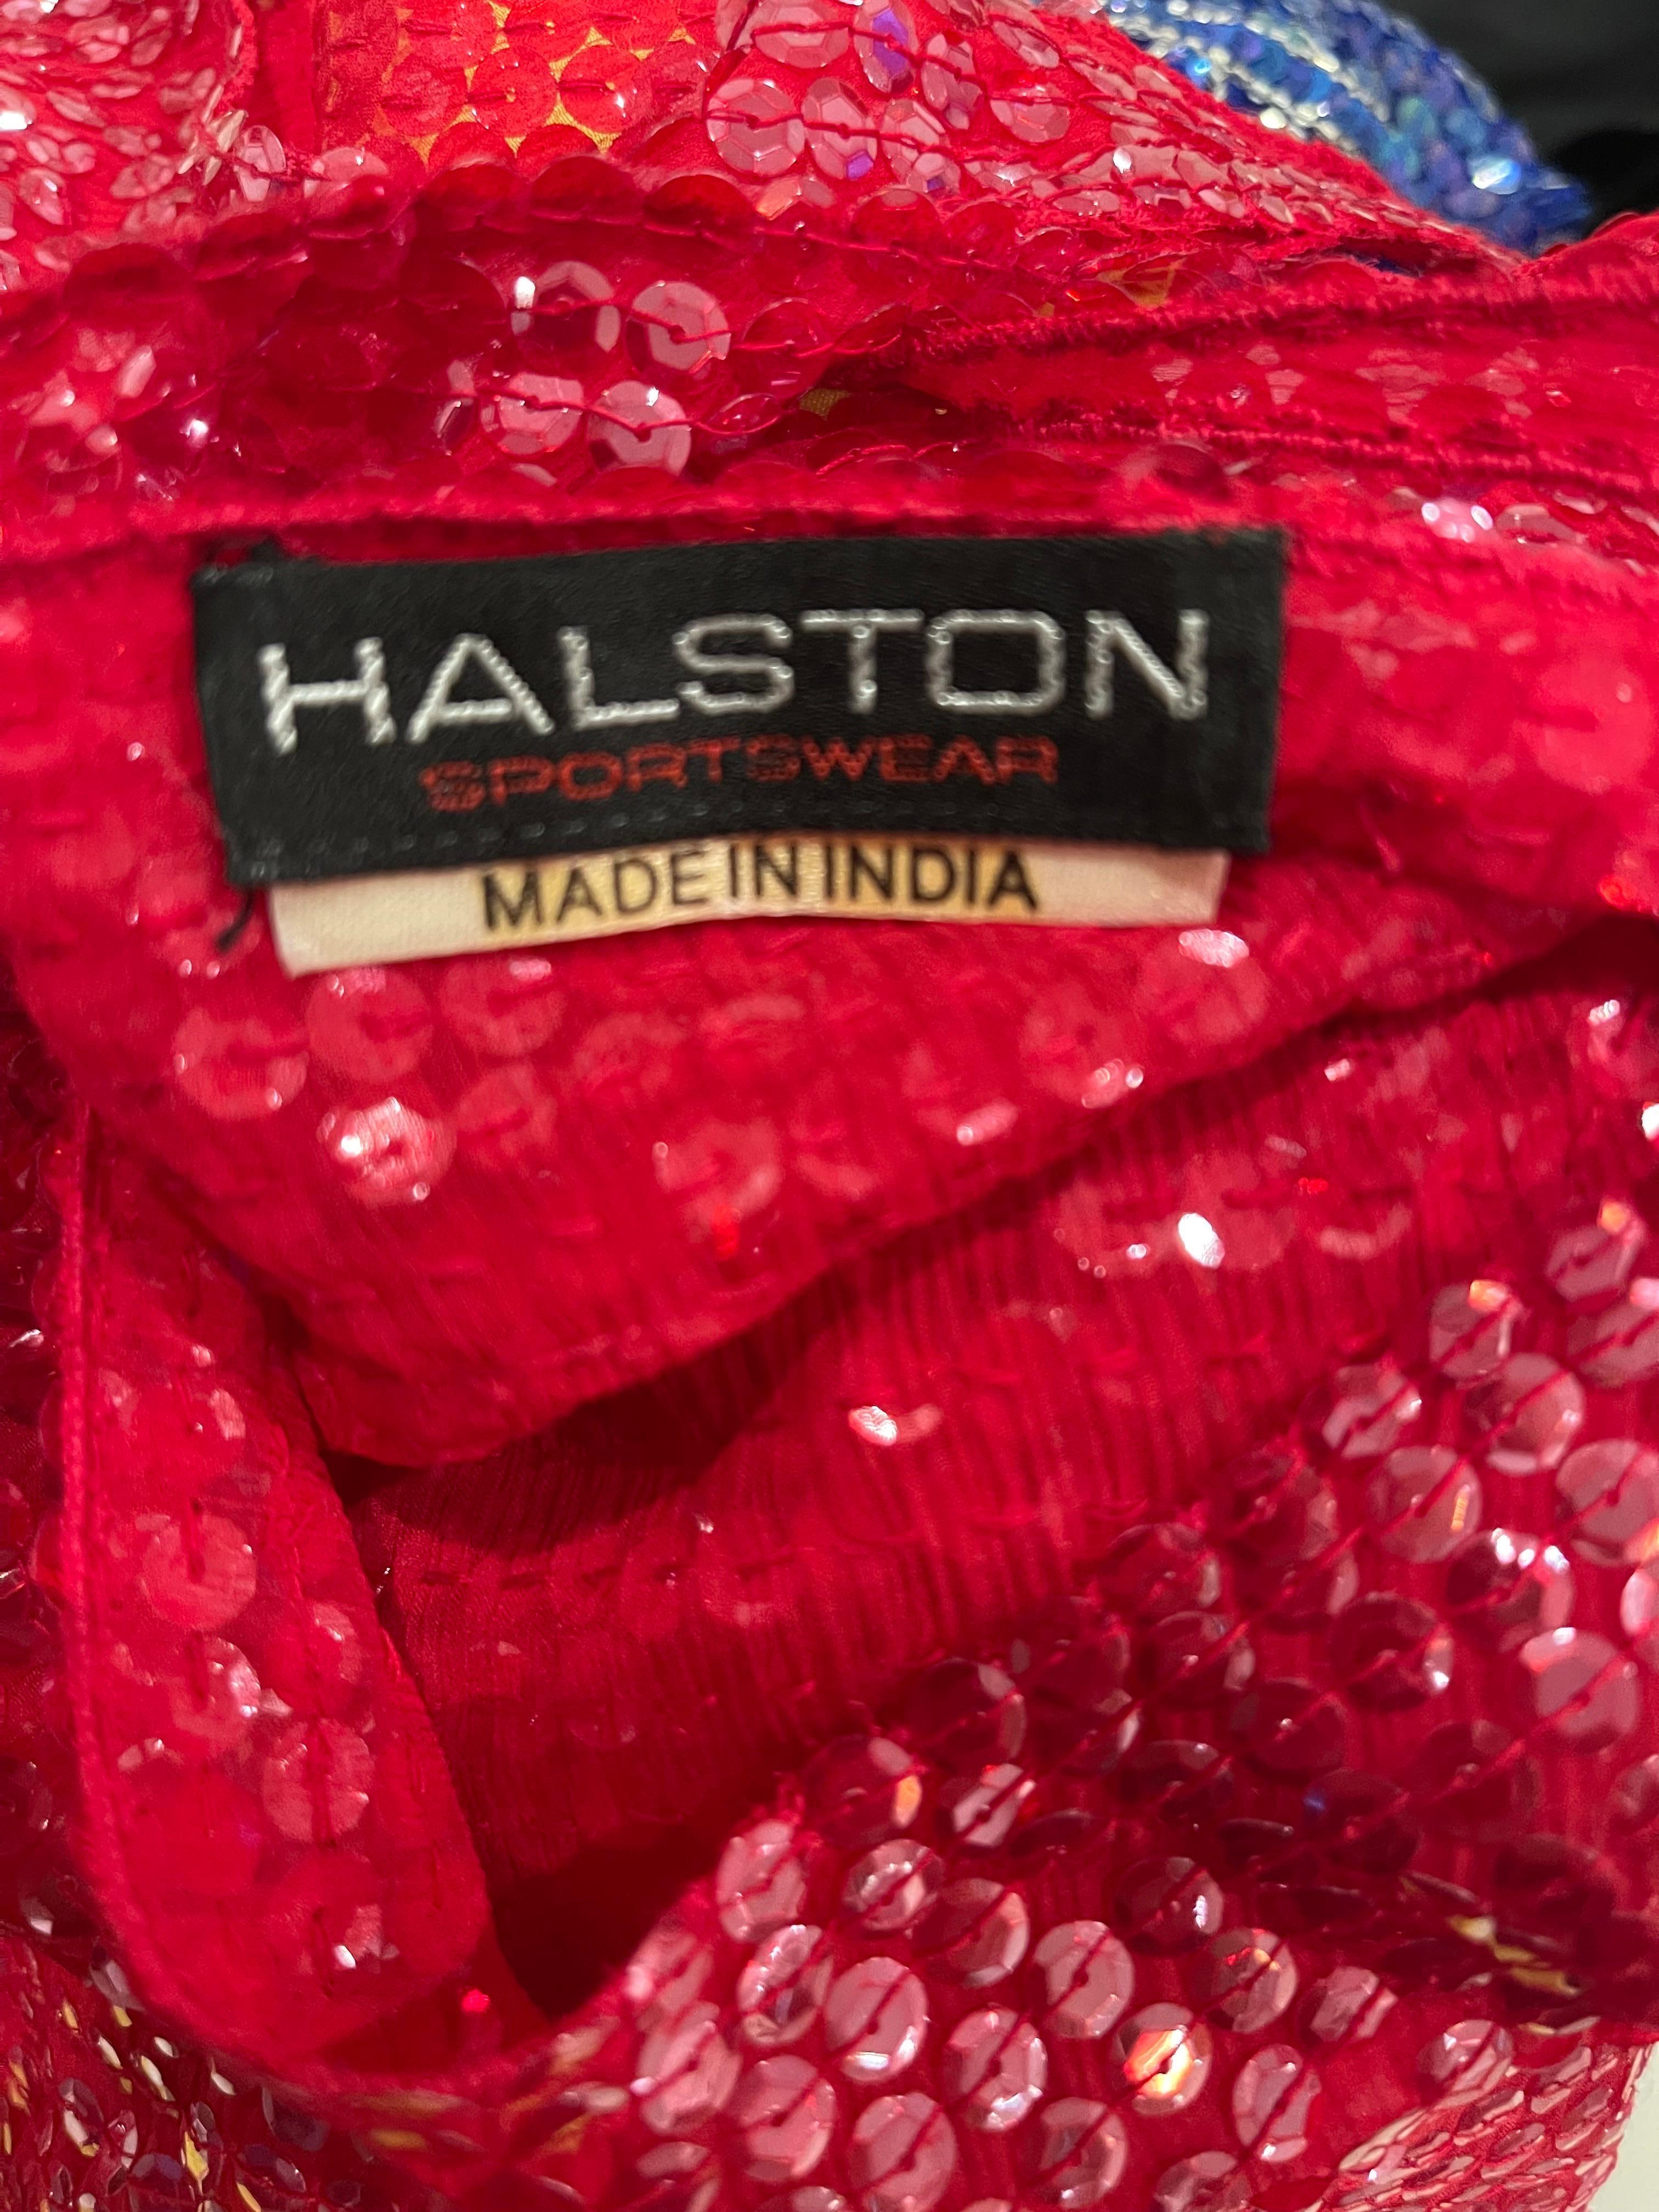 Halston 1970s Lipstick Red Silk Chiffon Fully Sequin Vintage 70s Sleeveless Top In Excellent Condition For Sale In San Diego, CA